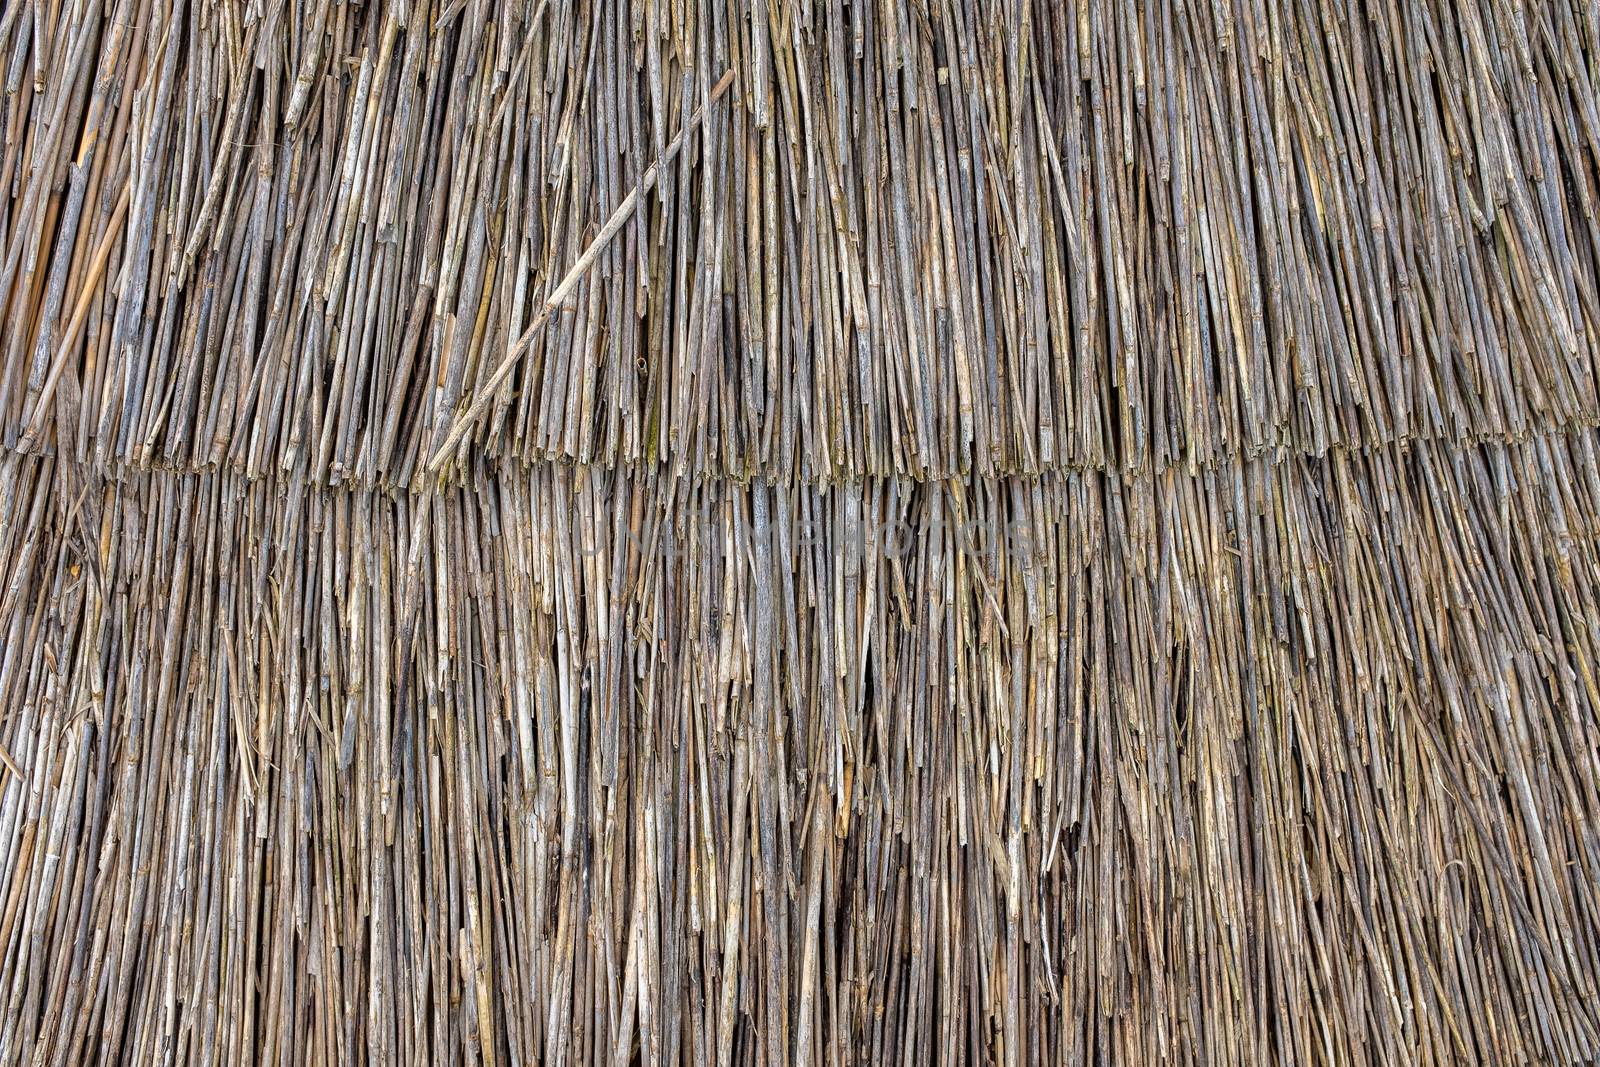 Abstract Background Texture Of A Thatched Roof, Thatch or Thatching